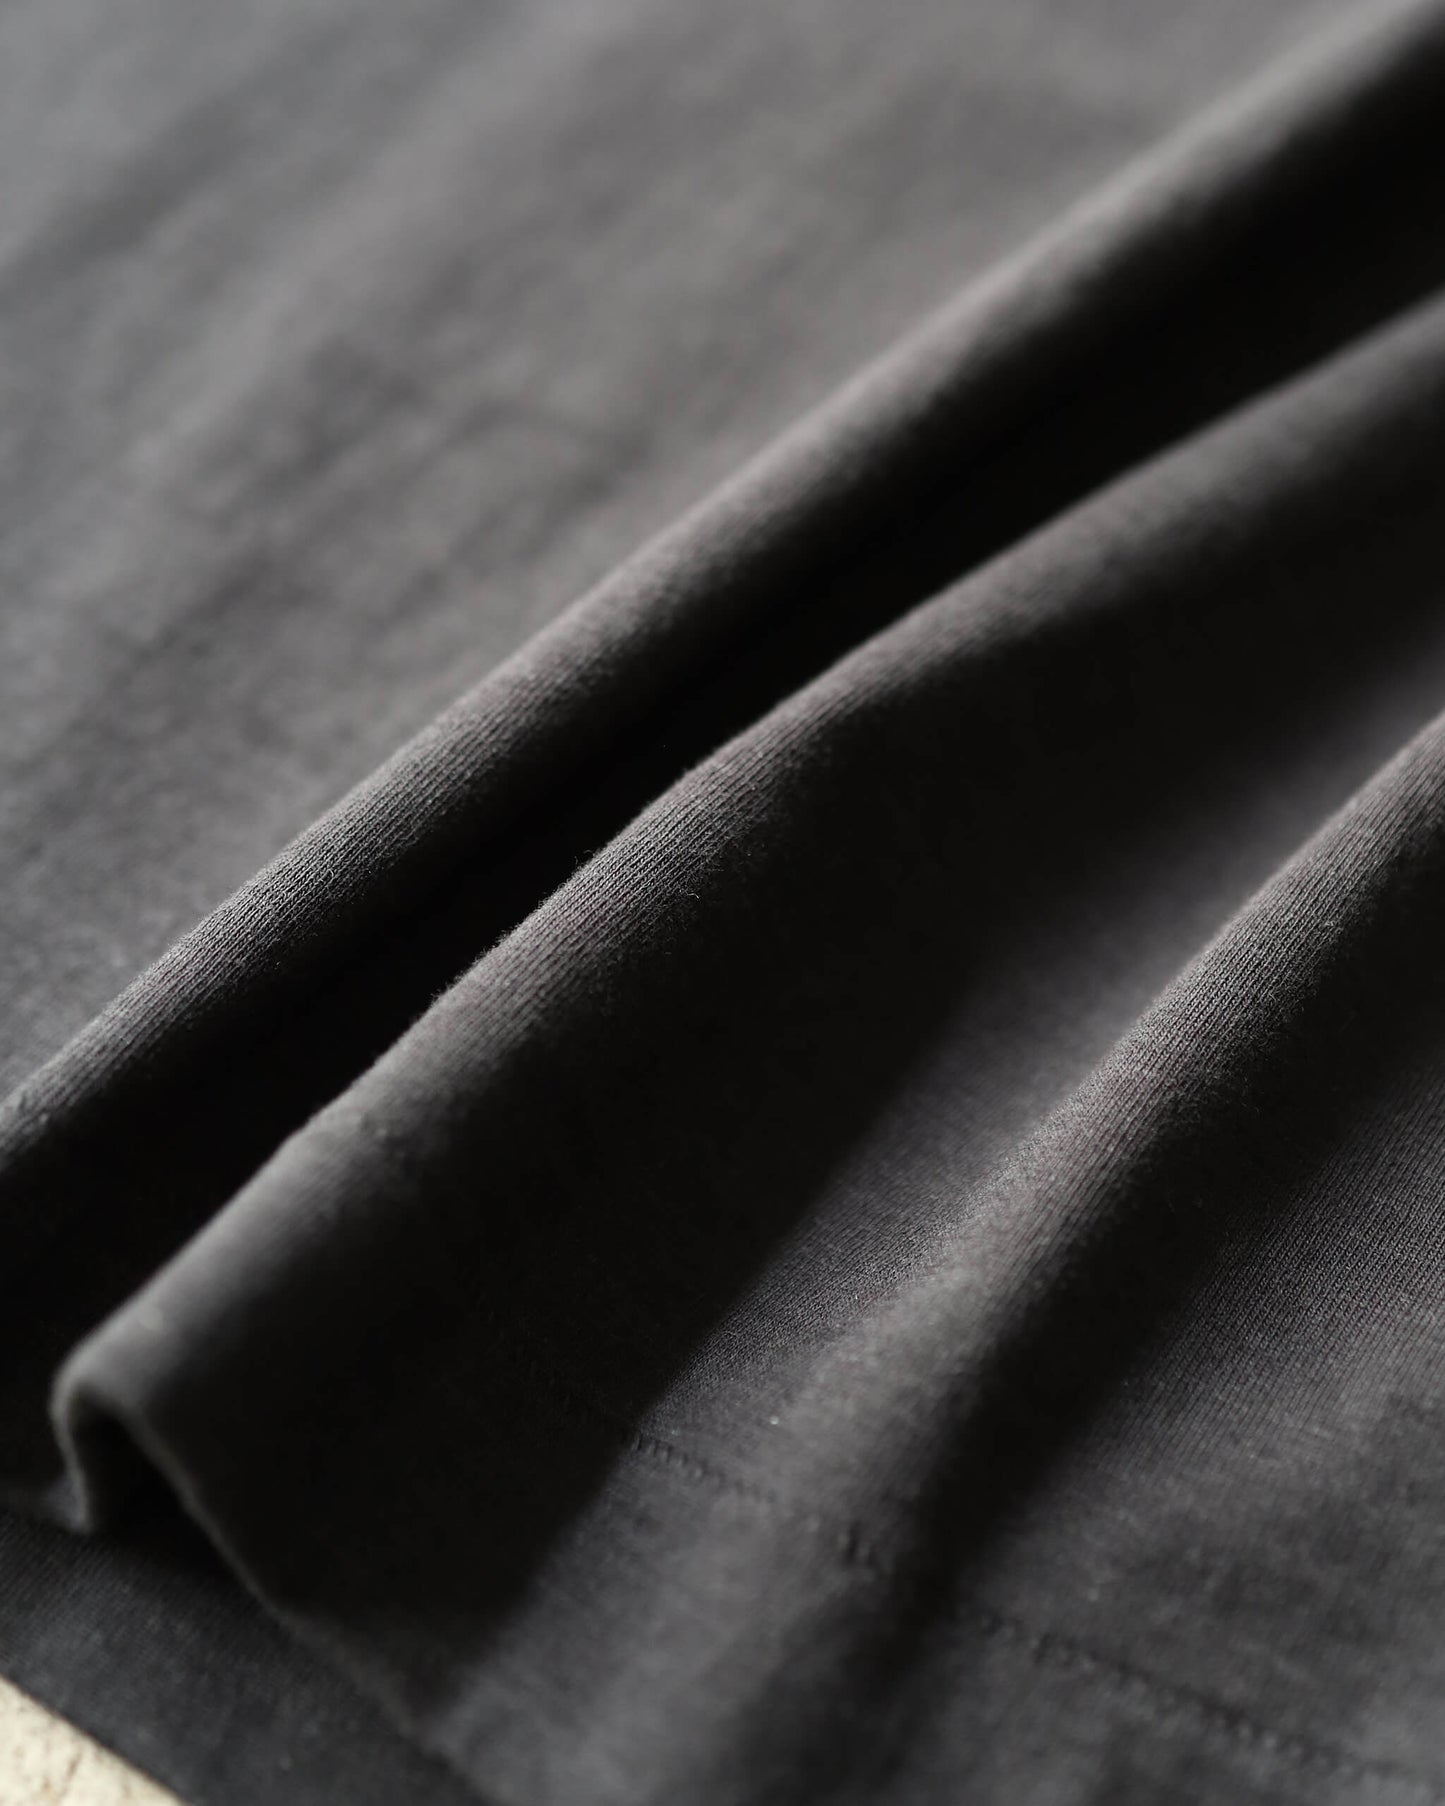 HAND PRINTED COTTON JERSEY / CREW NECK T-SHIRT "CHARCOAL"